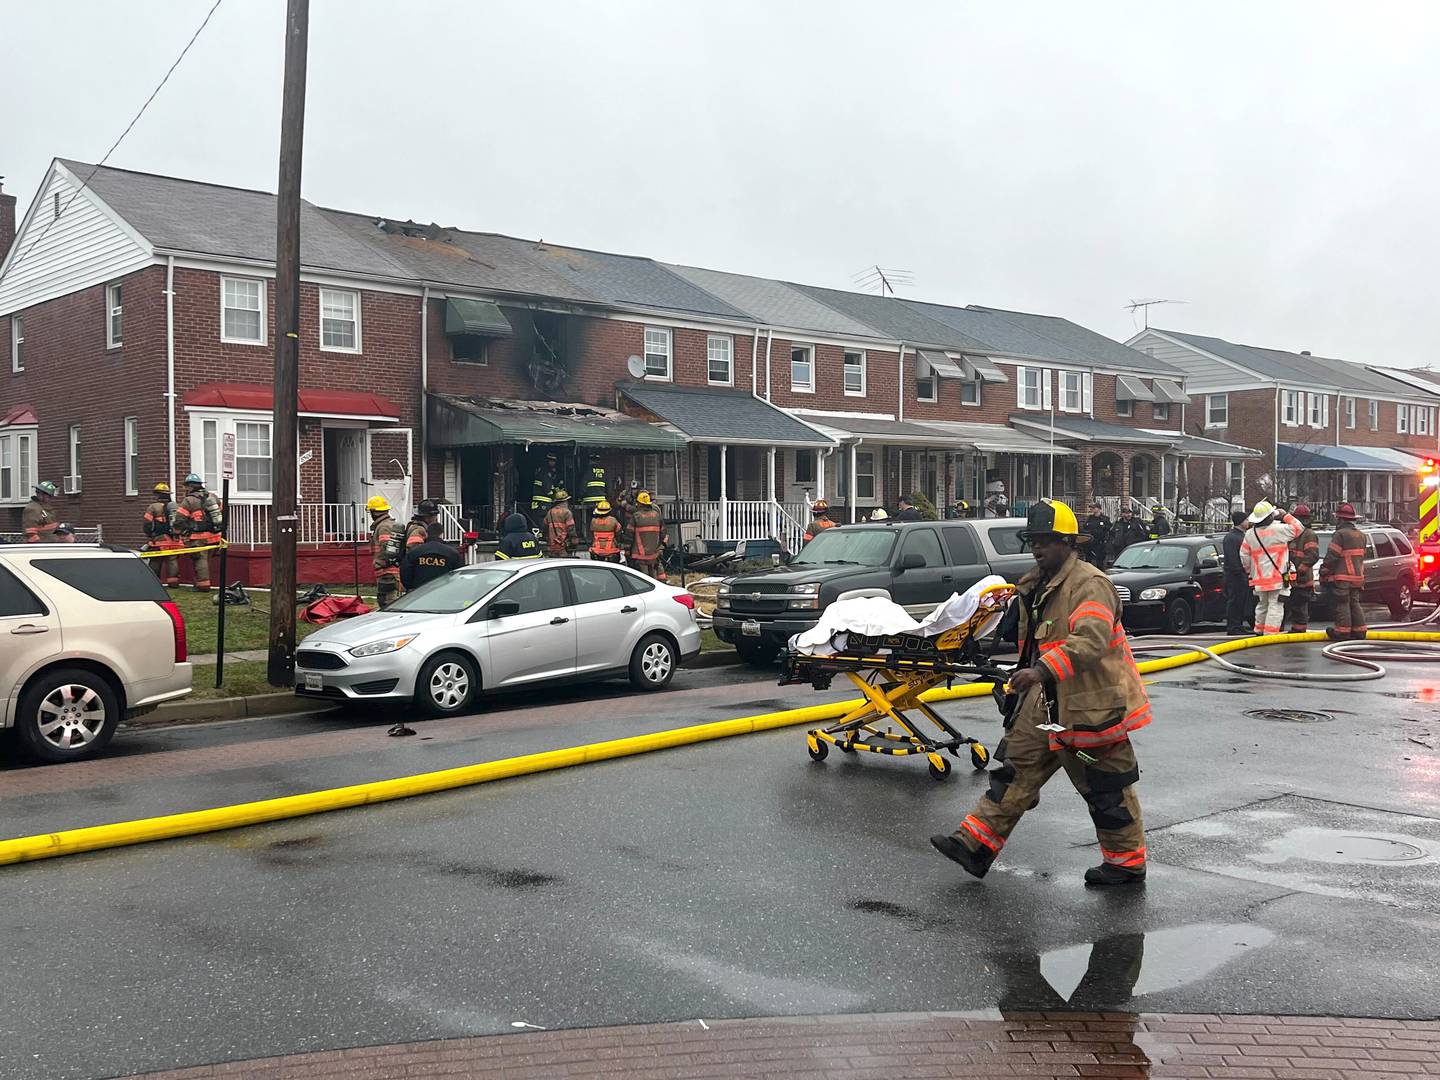 Baltimore County Firefighters are working a residential fire with rescues and injuries in Dundalk at Oxley Rd. And Kavanagh Rd. Multiple injuries were reported and conditions are also reported as grave to stable.